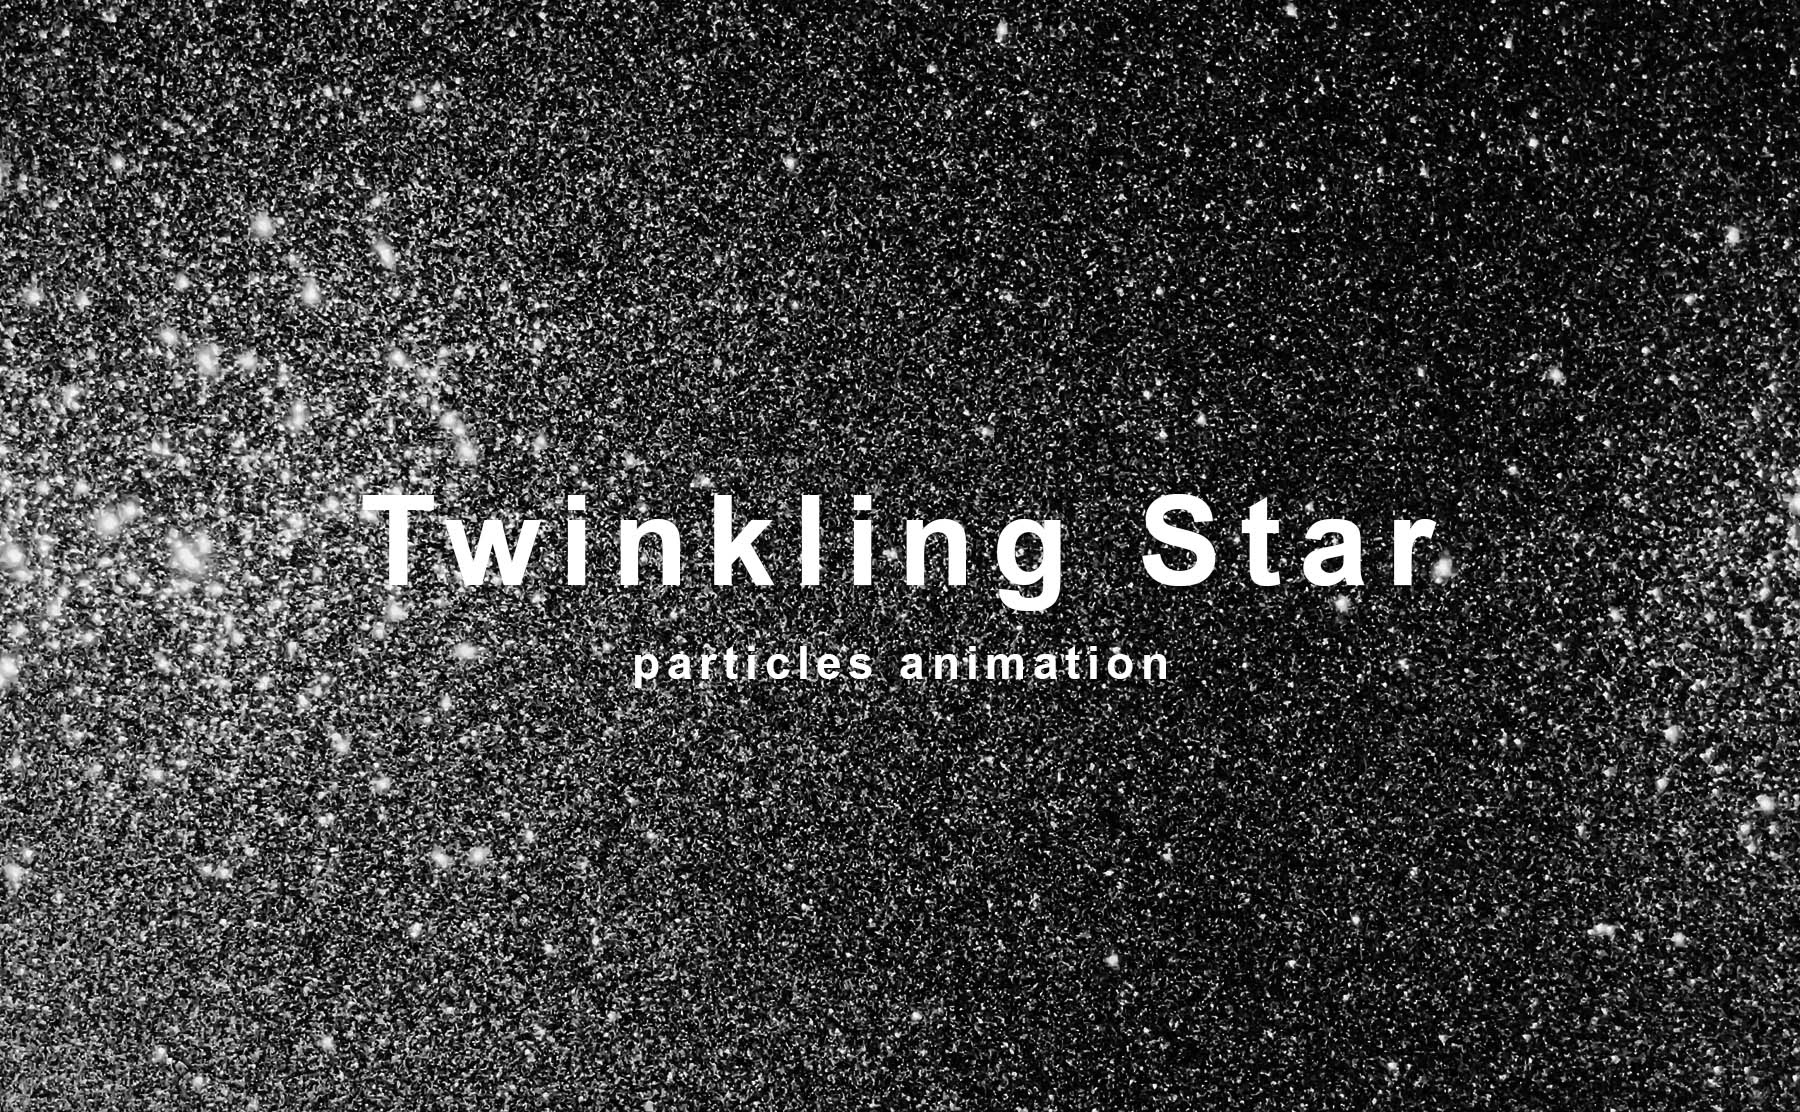 Free 9 Twinkling Star Particles Animation on Behance